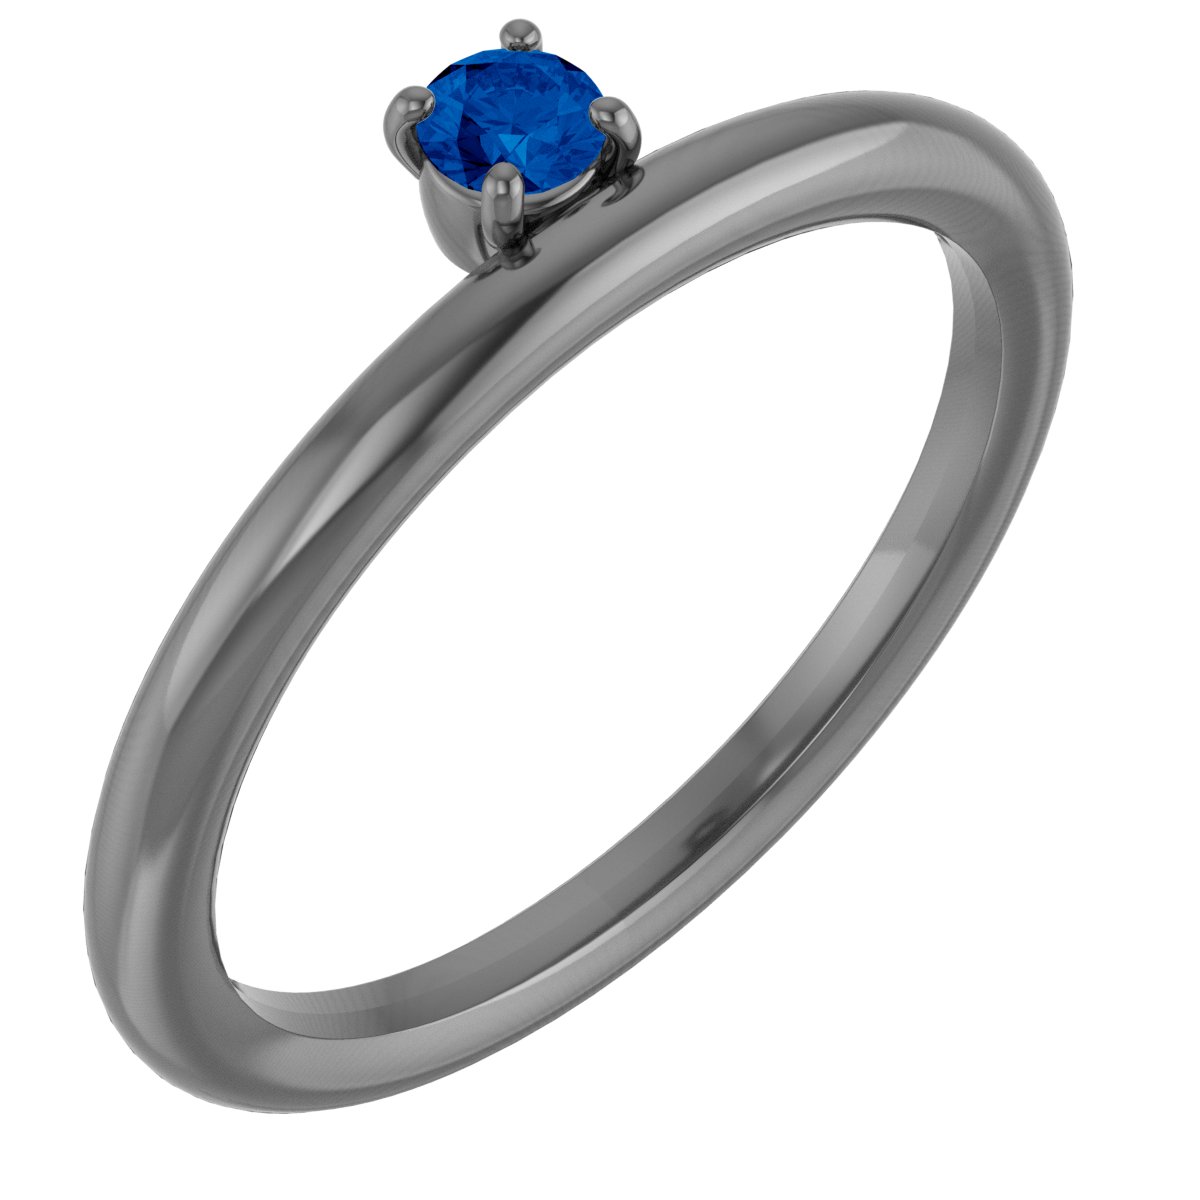 Sterling Silver Imitation Blue Sapphire Stackable Ring Ref. 13079520